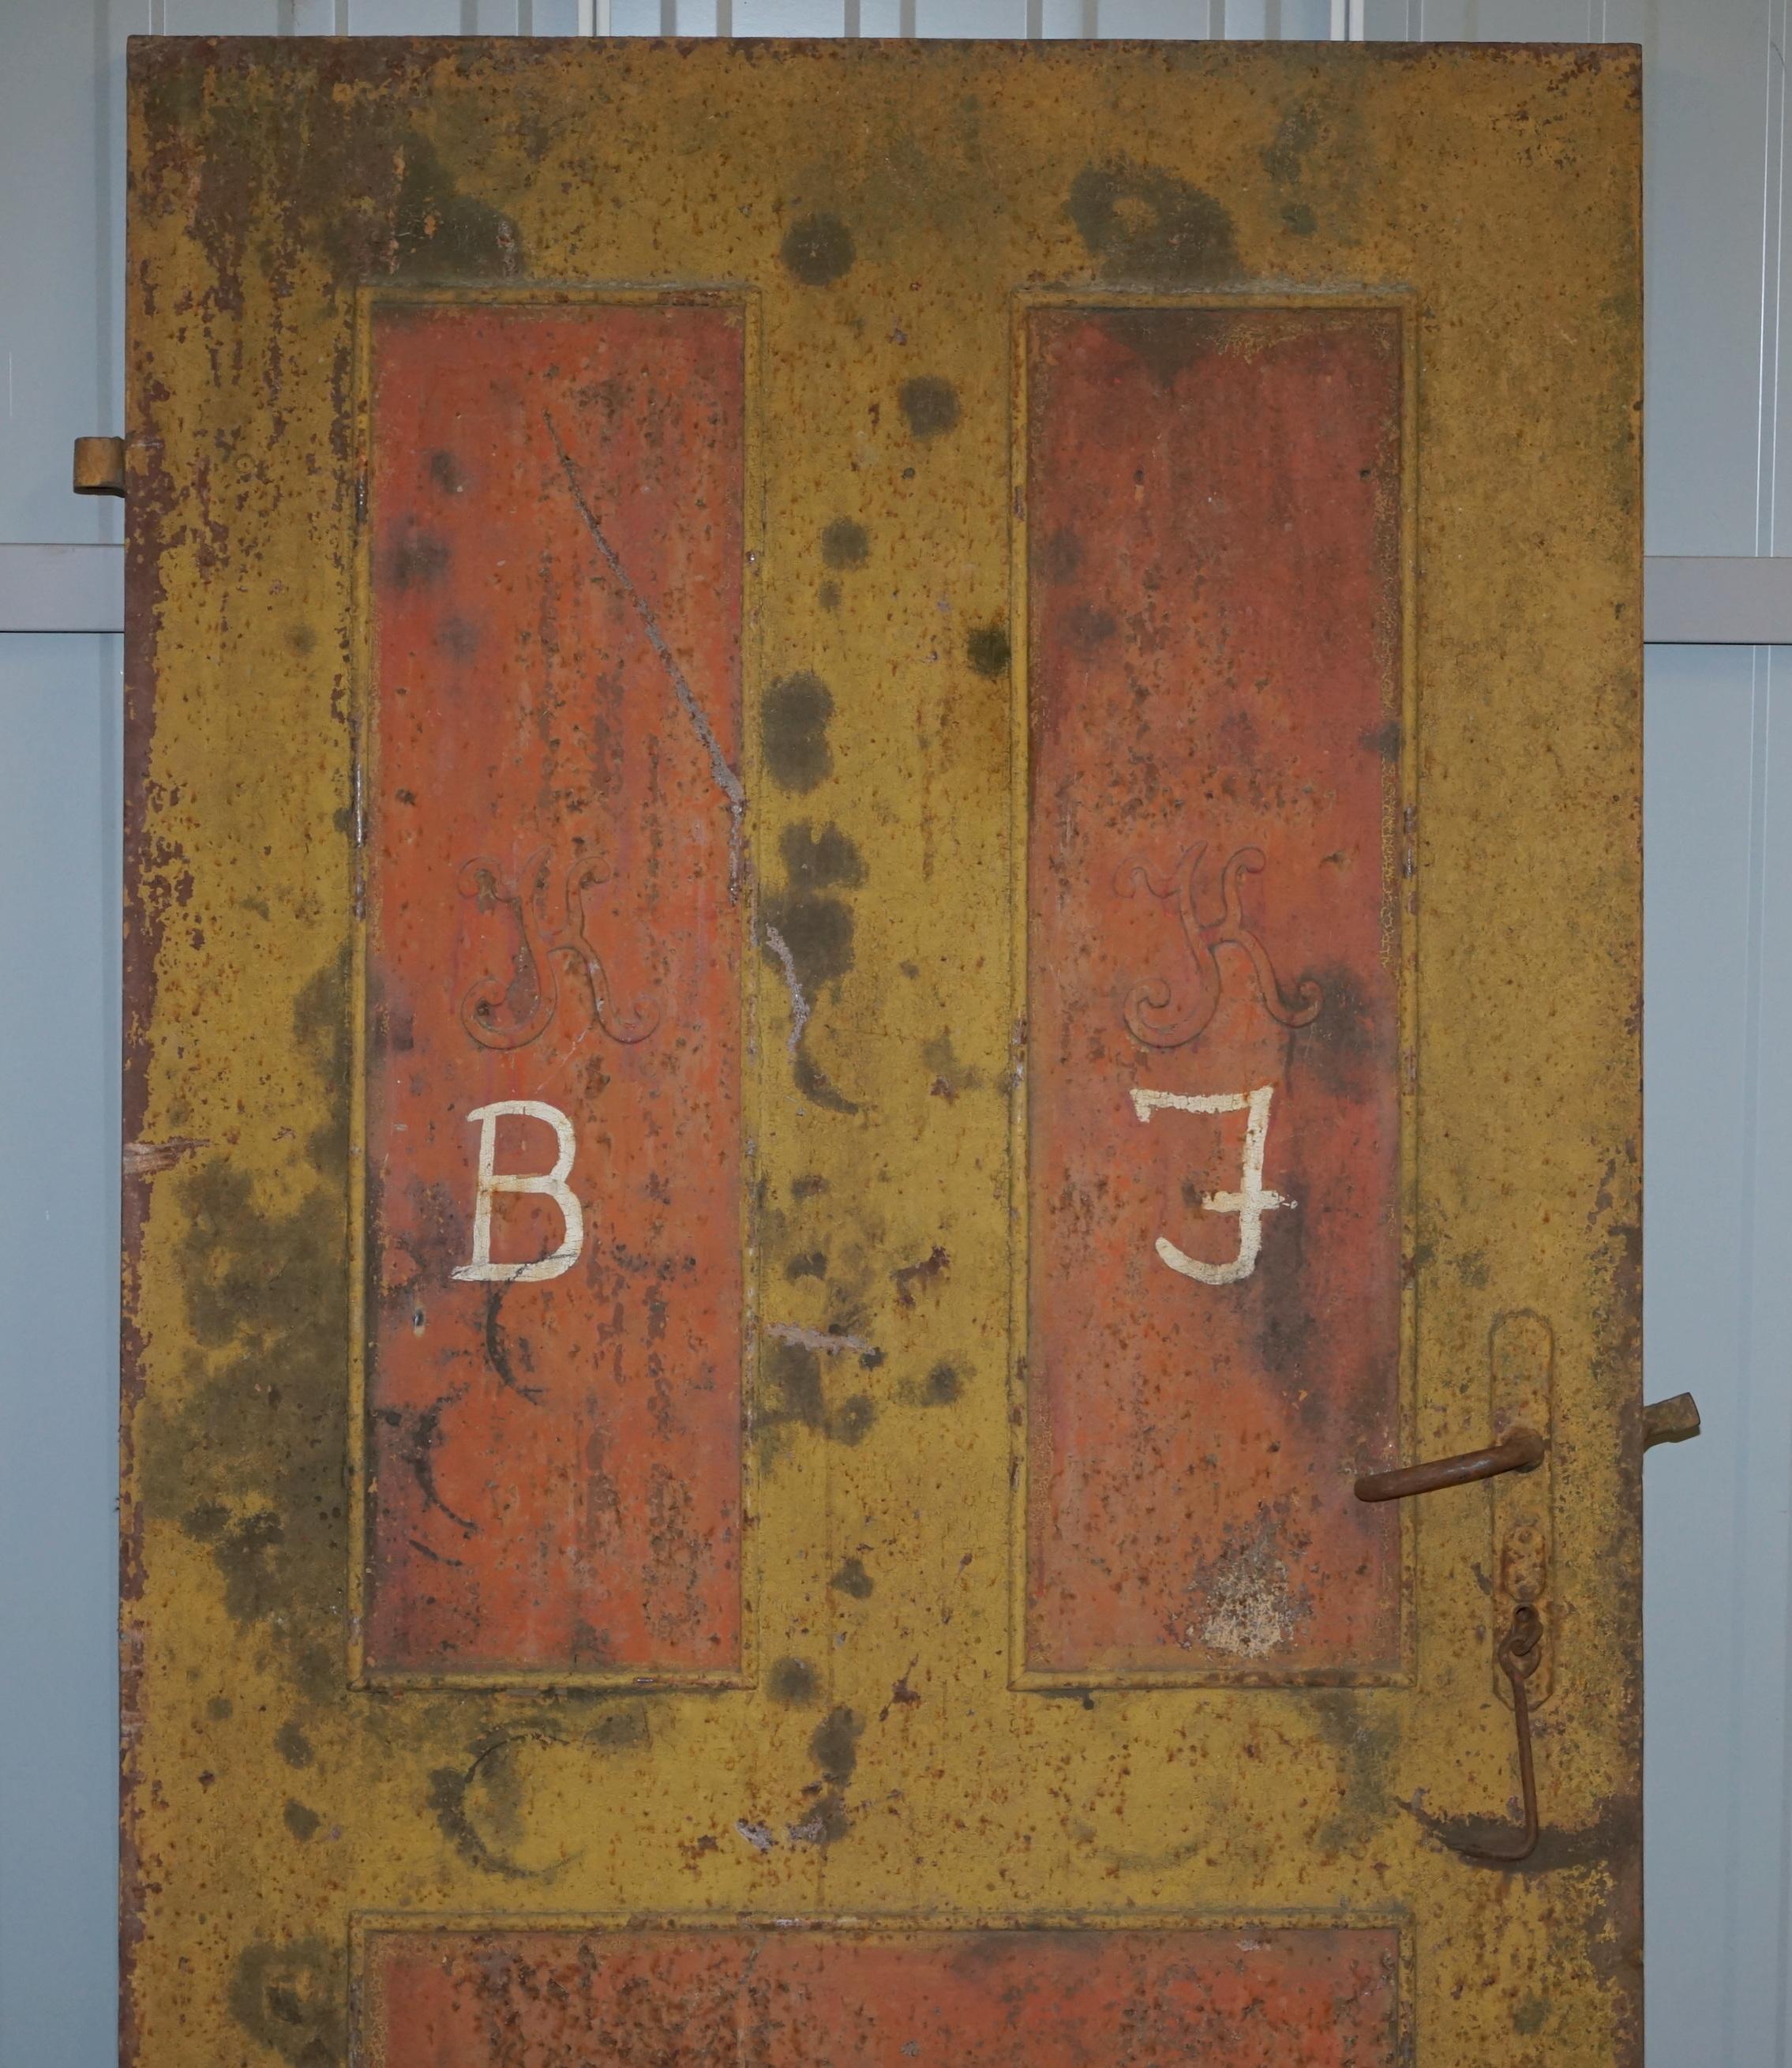 We are delighted to offer for sale this lovely original Hungarian hand painted security door dating from 1922 used for stopping looting after the war

A very good looking piece, ideally suited as decoration only, it was made as a security door in